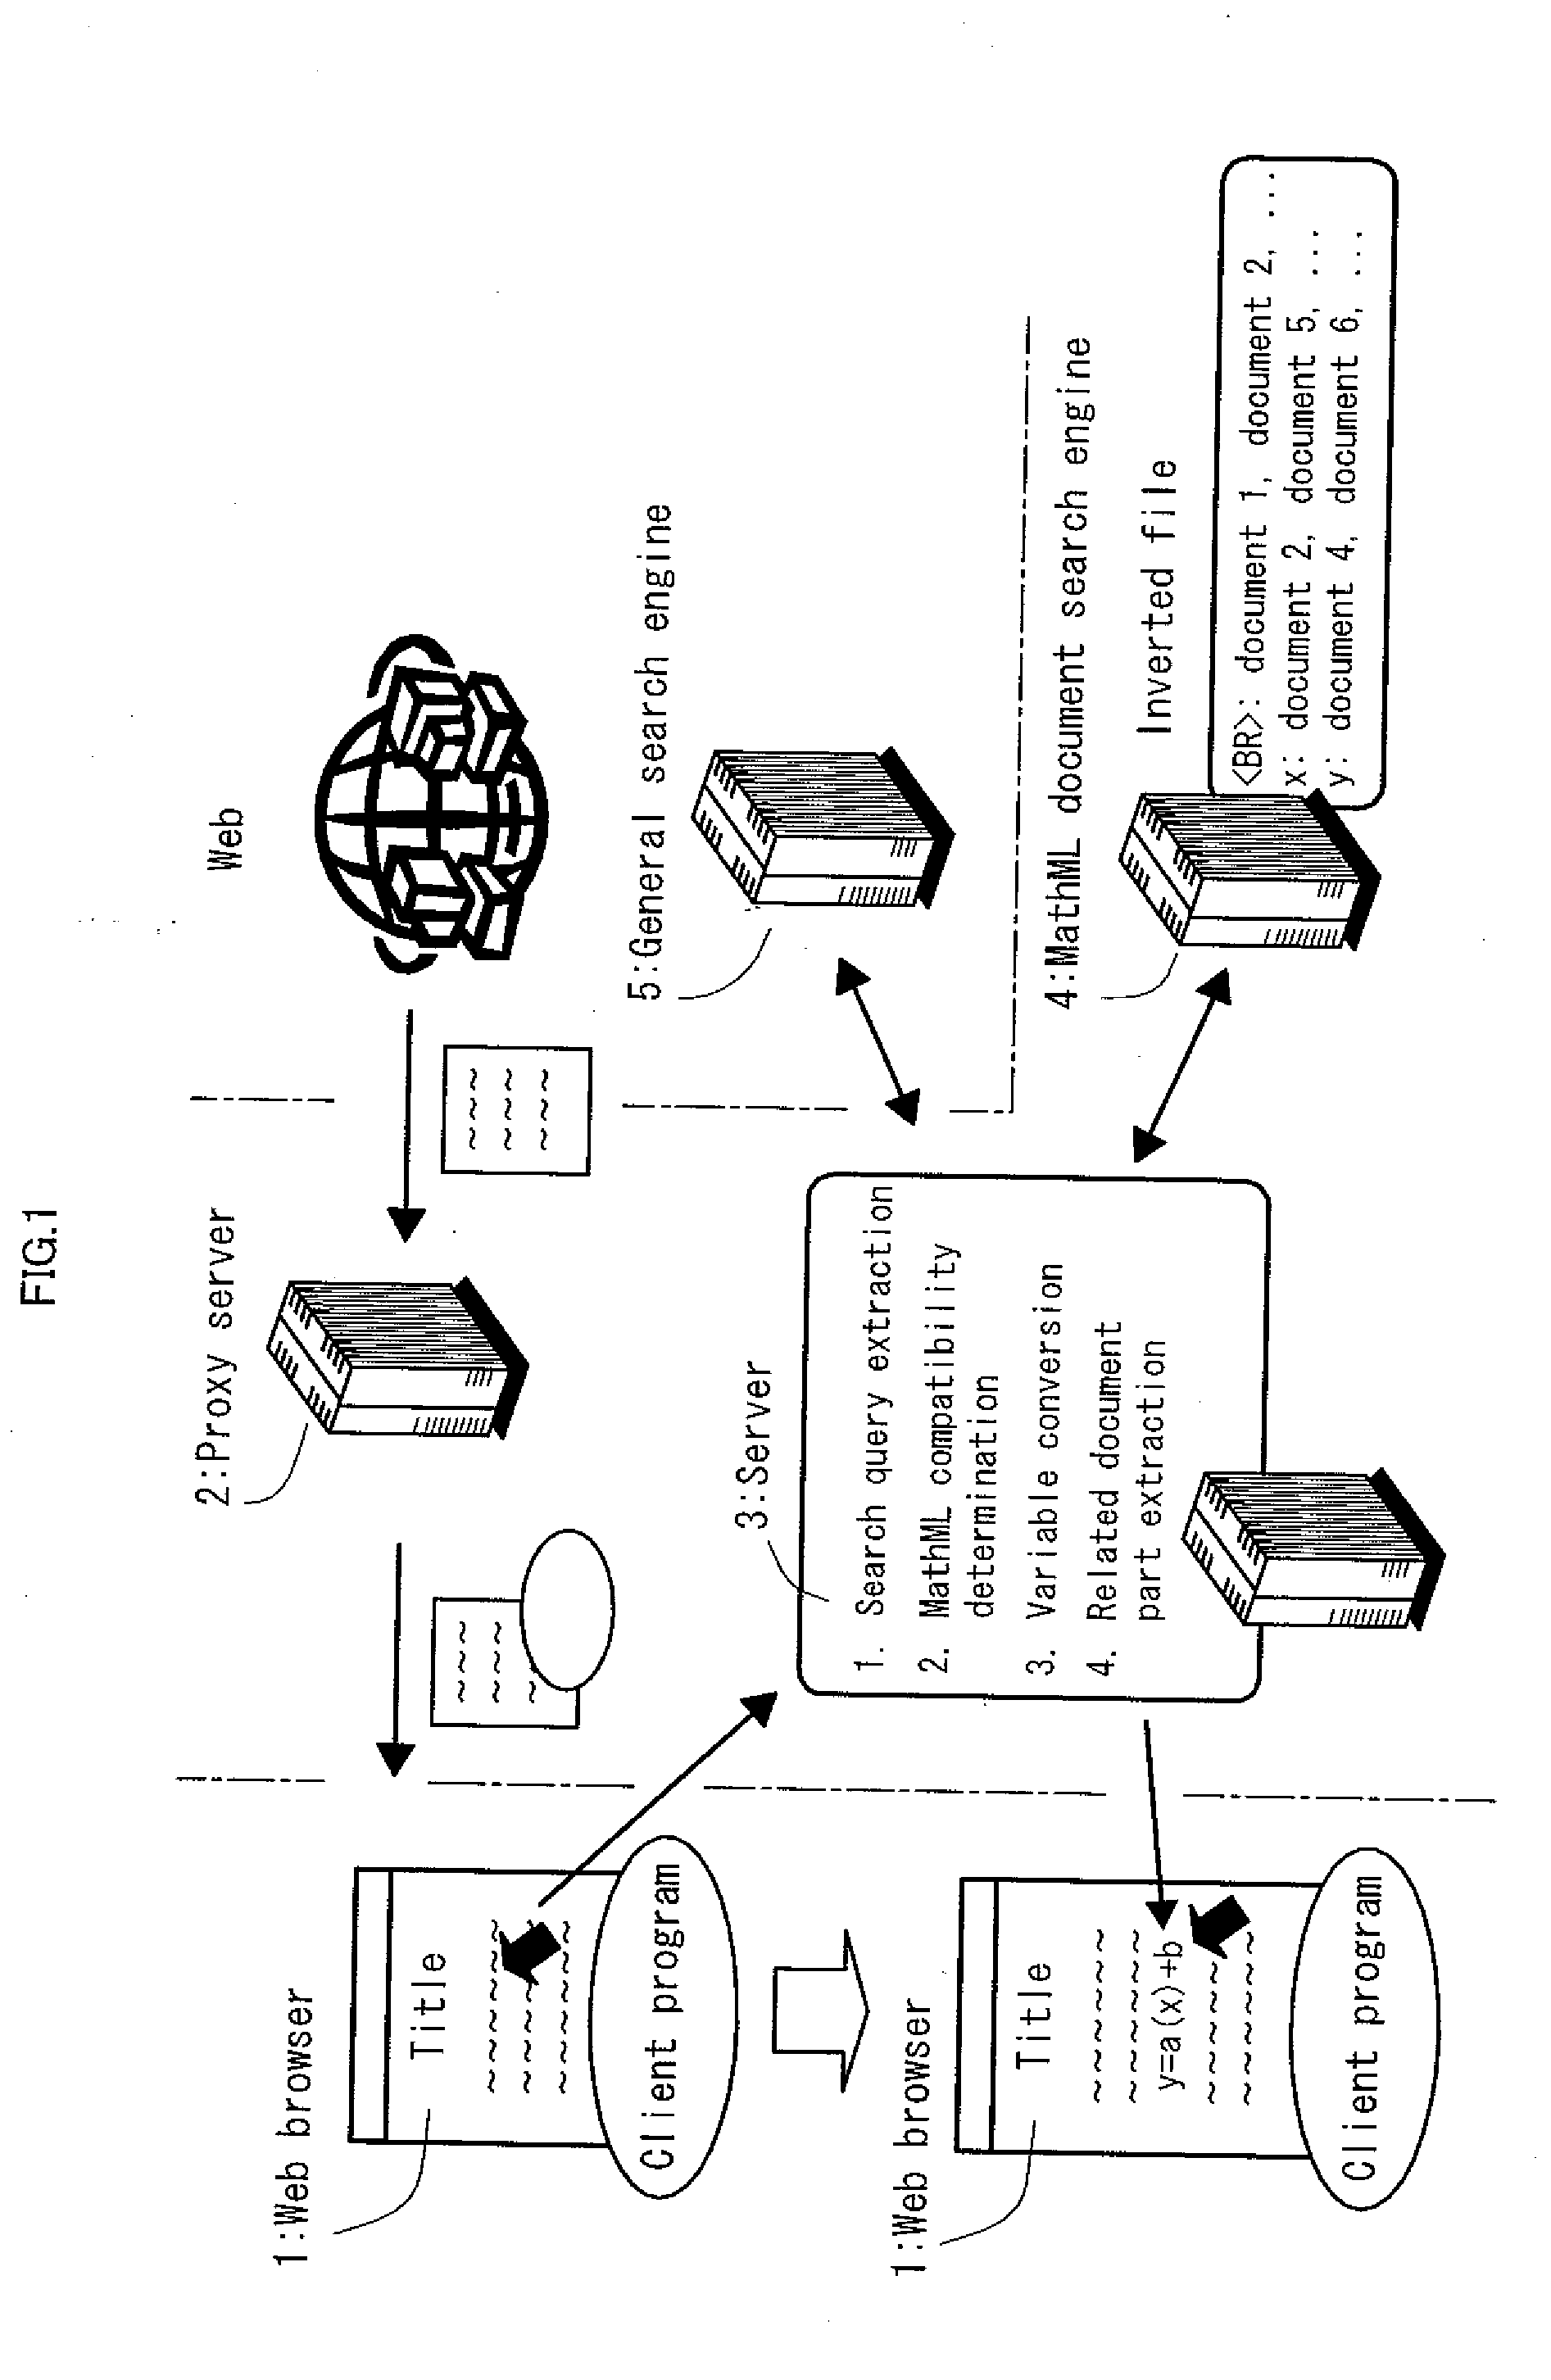 Mathematical expression structured language object search system and search method